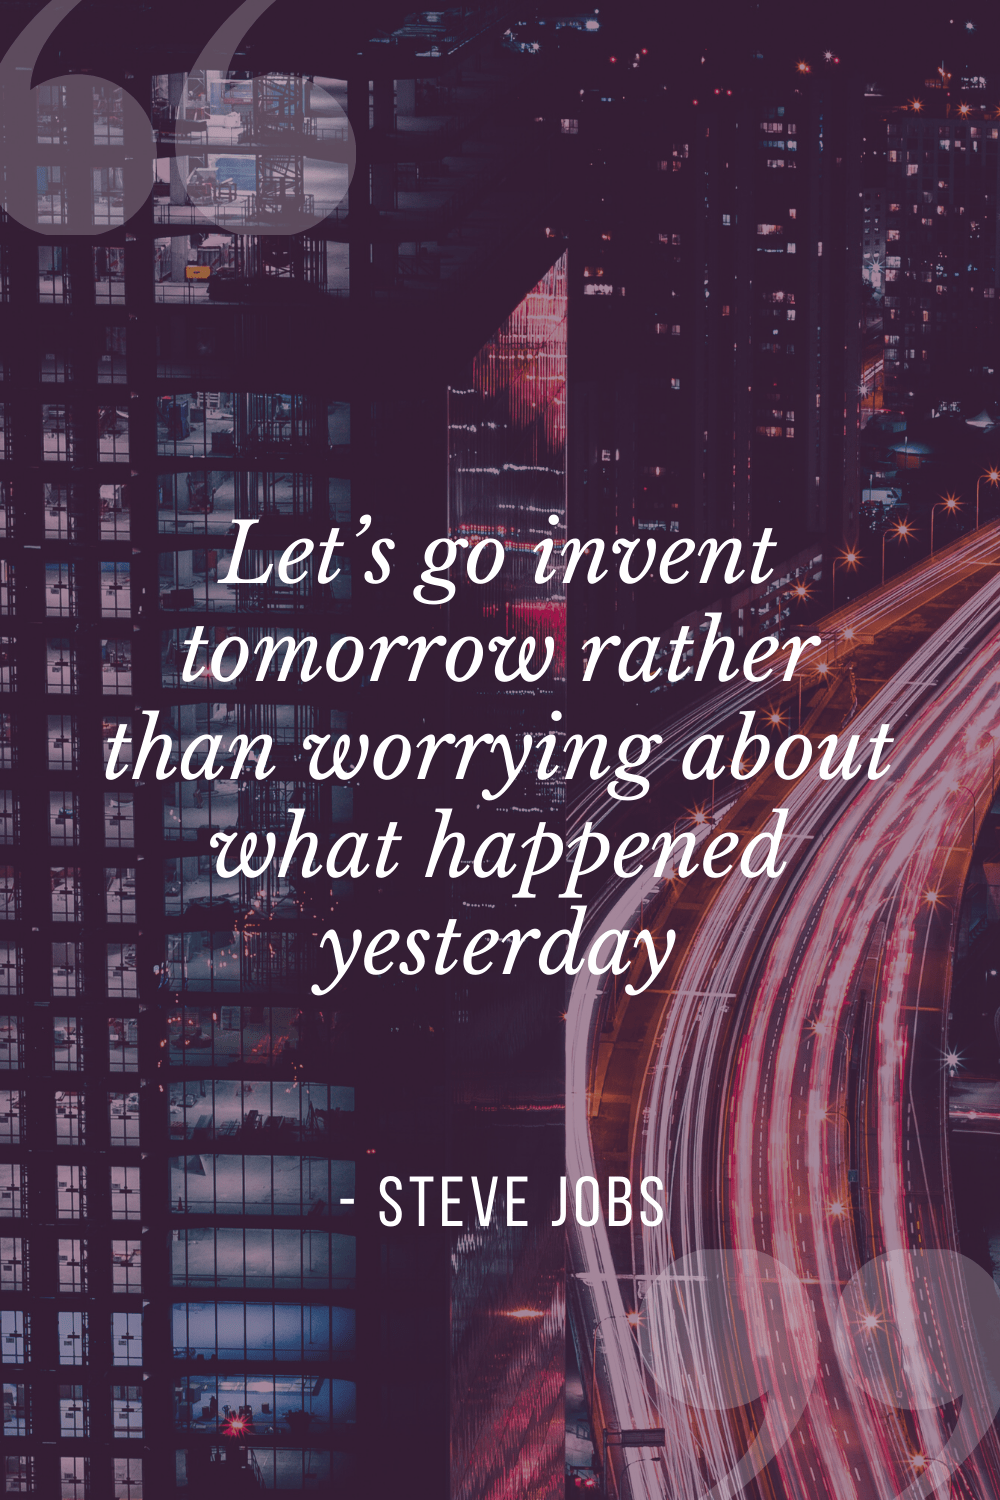 “Let’s go invent tomorrow rather than worrying about what happened yesterday”, Steve Jobs